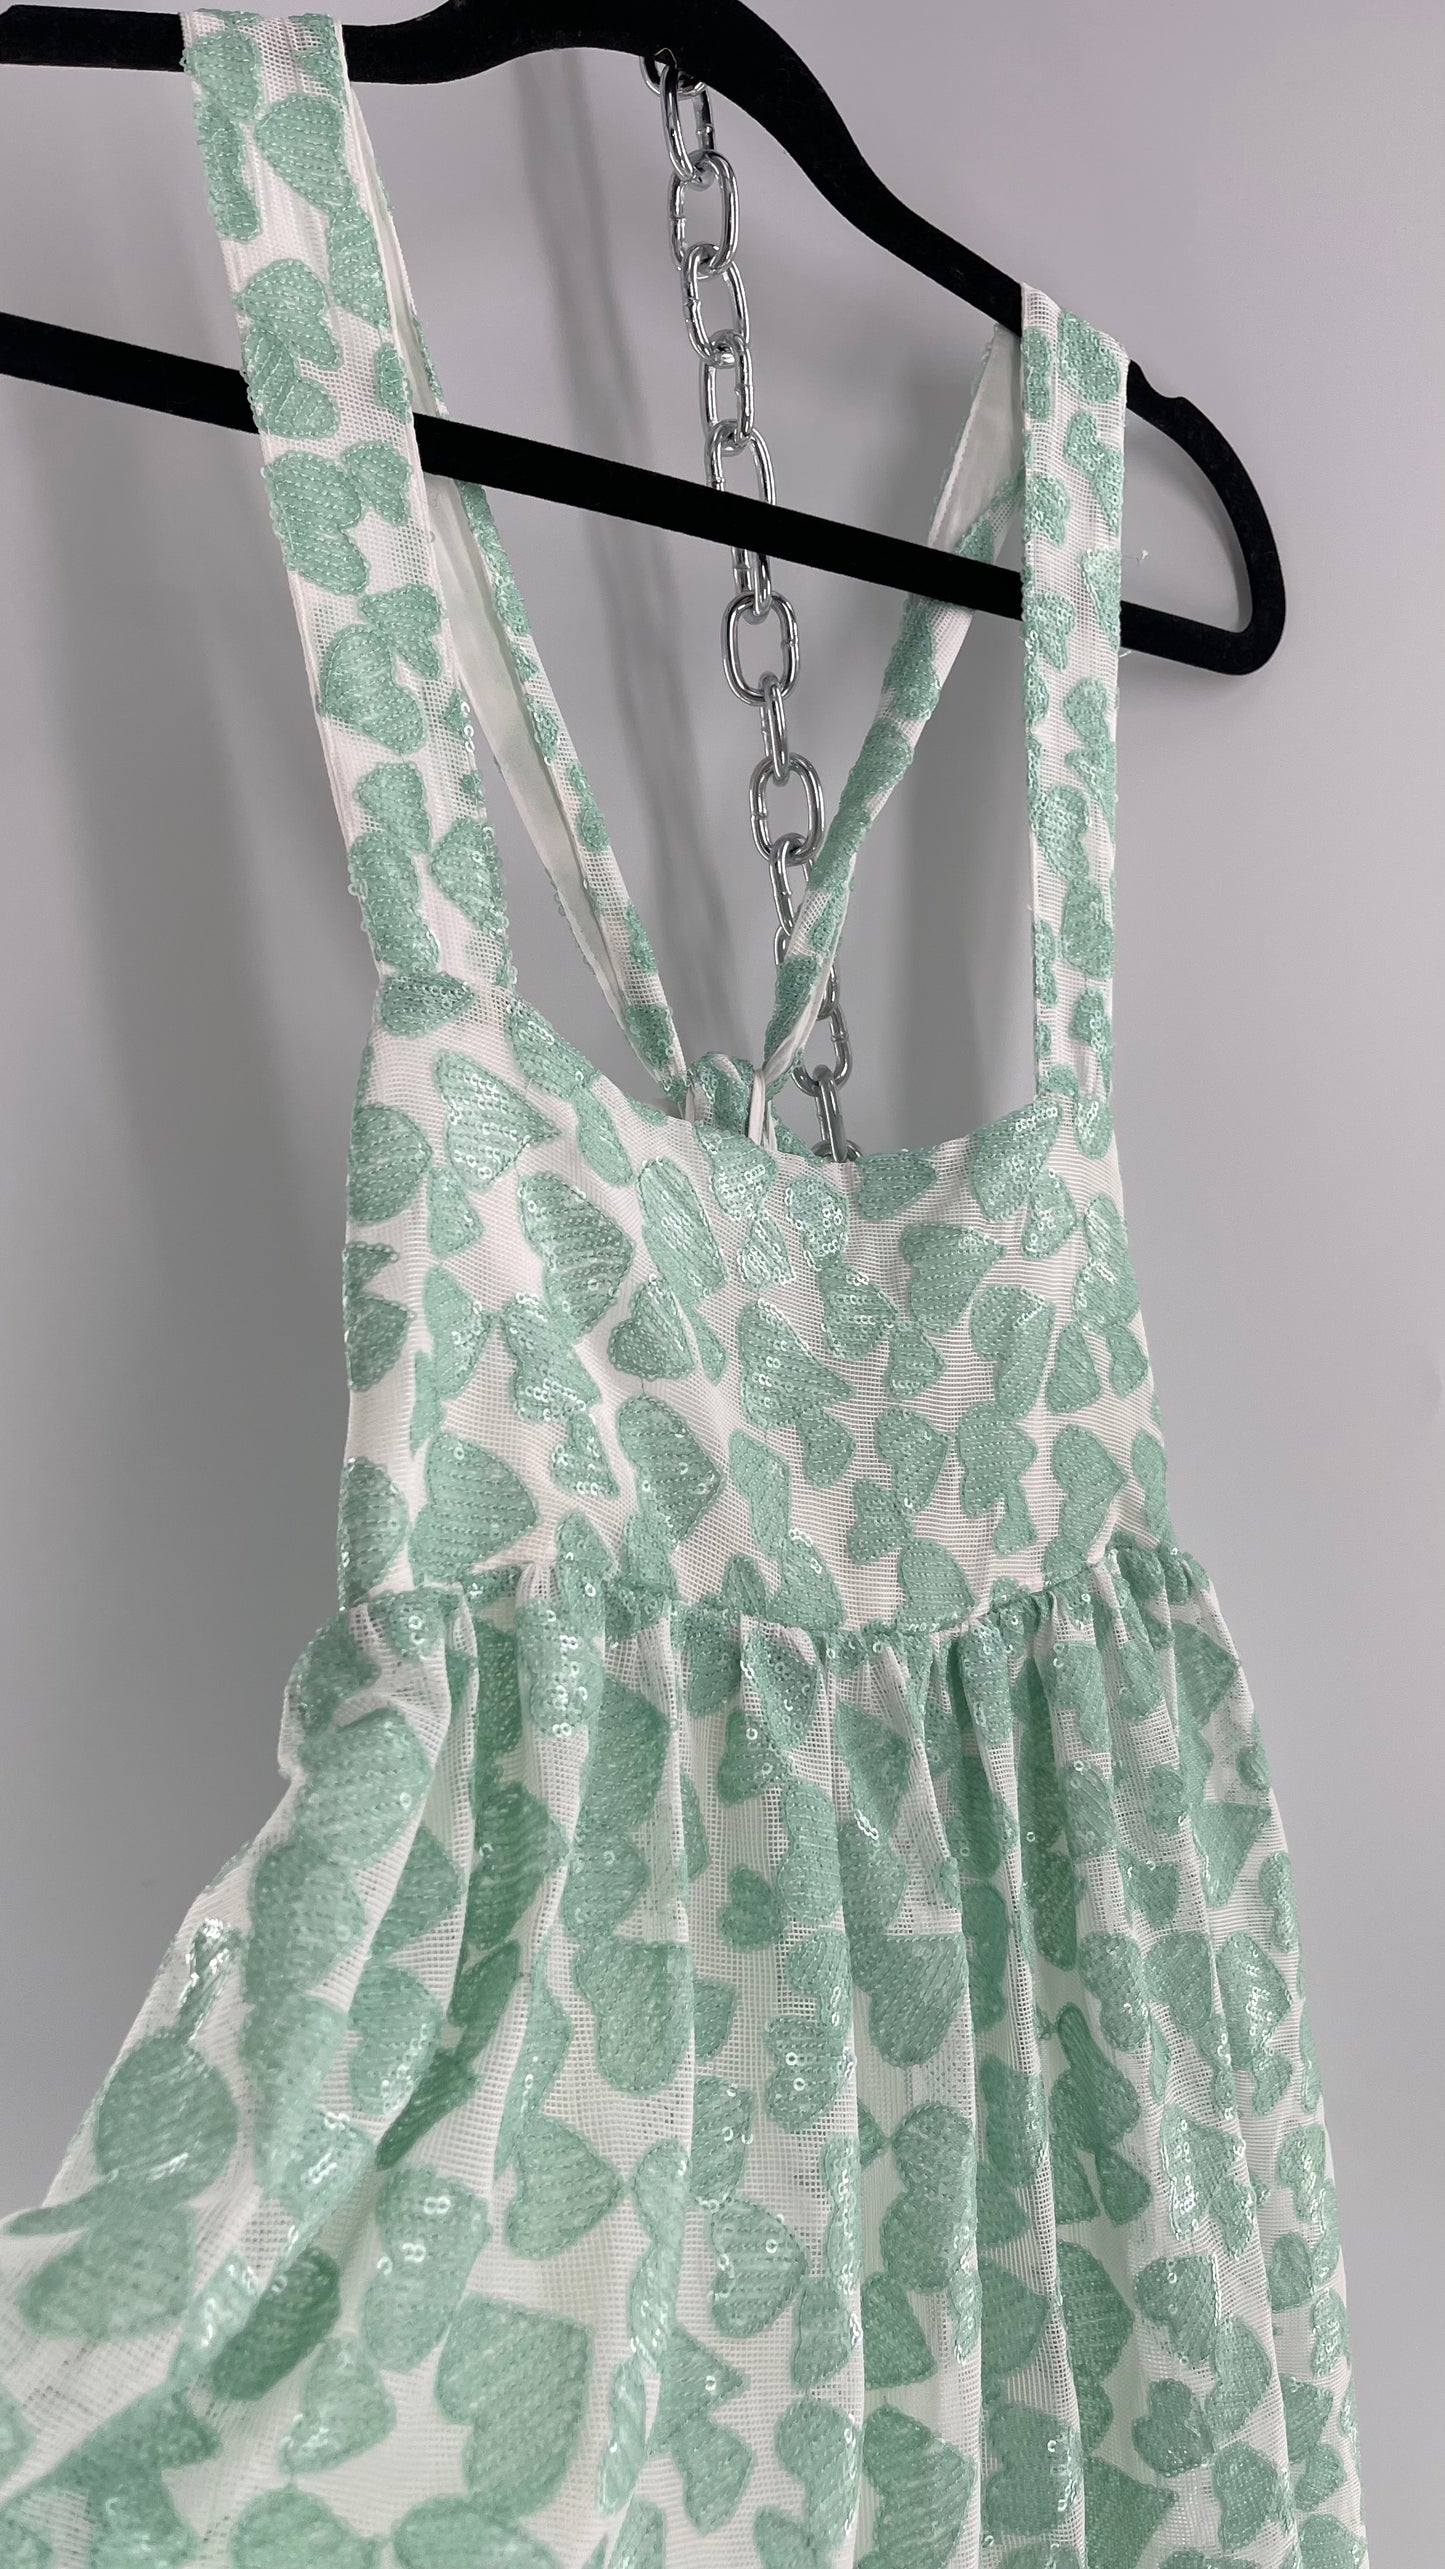 Kimchi Blue Babydoll Dress Covered in Sequin Teal/Mint Hearts (Medium)